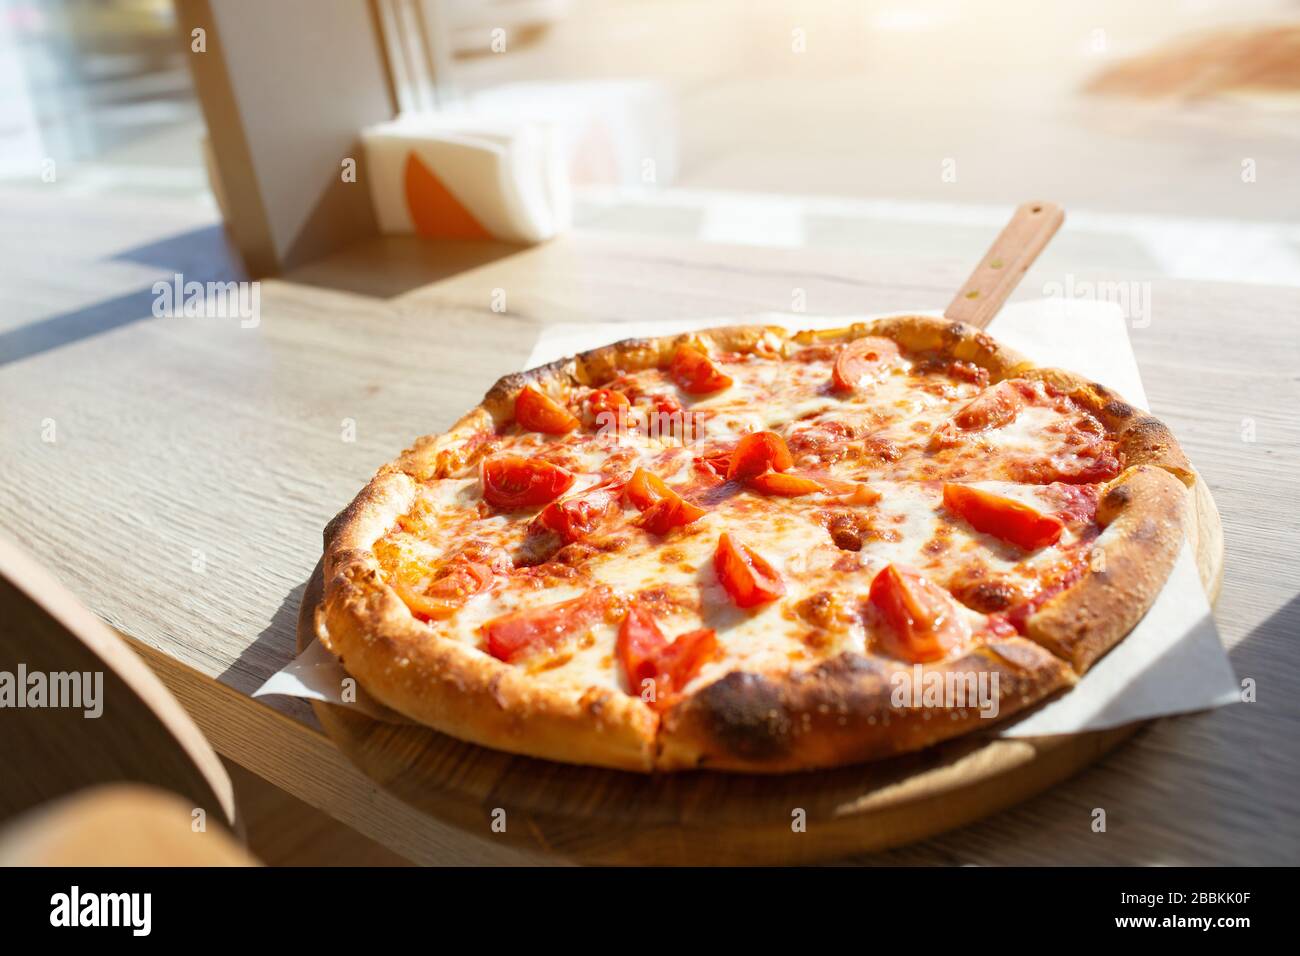 Big pizza stands on a table in a cafe. Italian pizza cut on pieces. Stock Photo